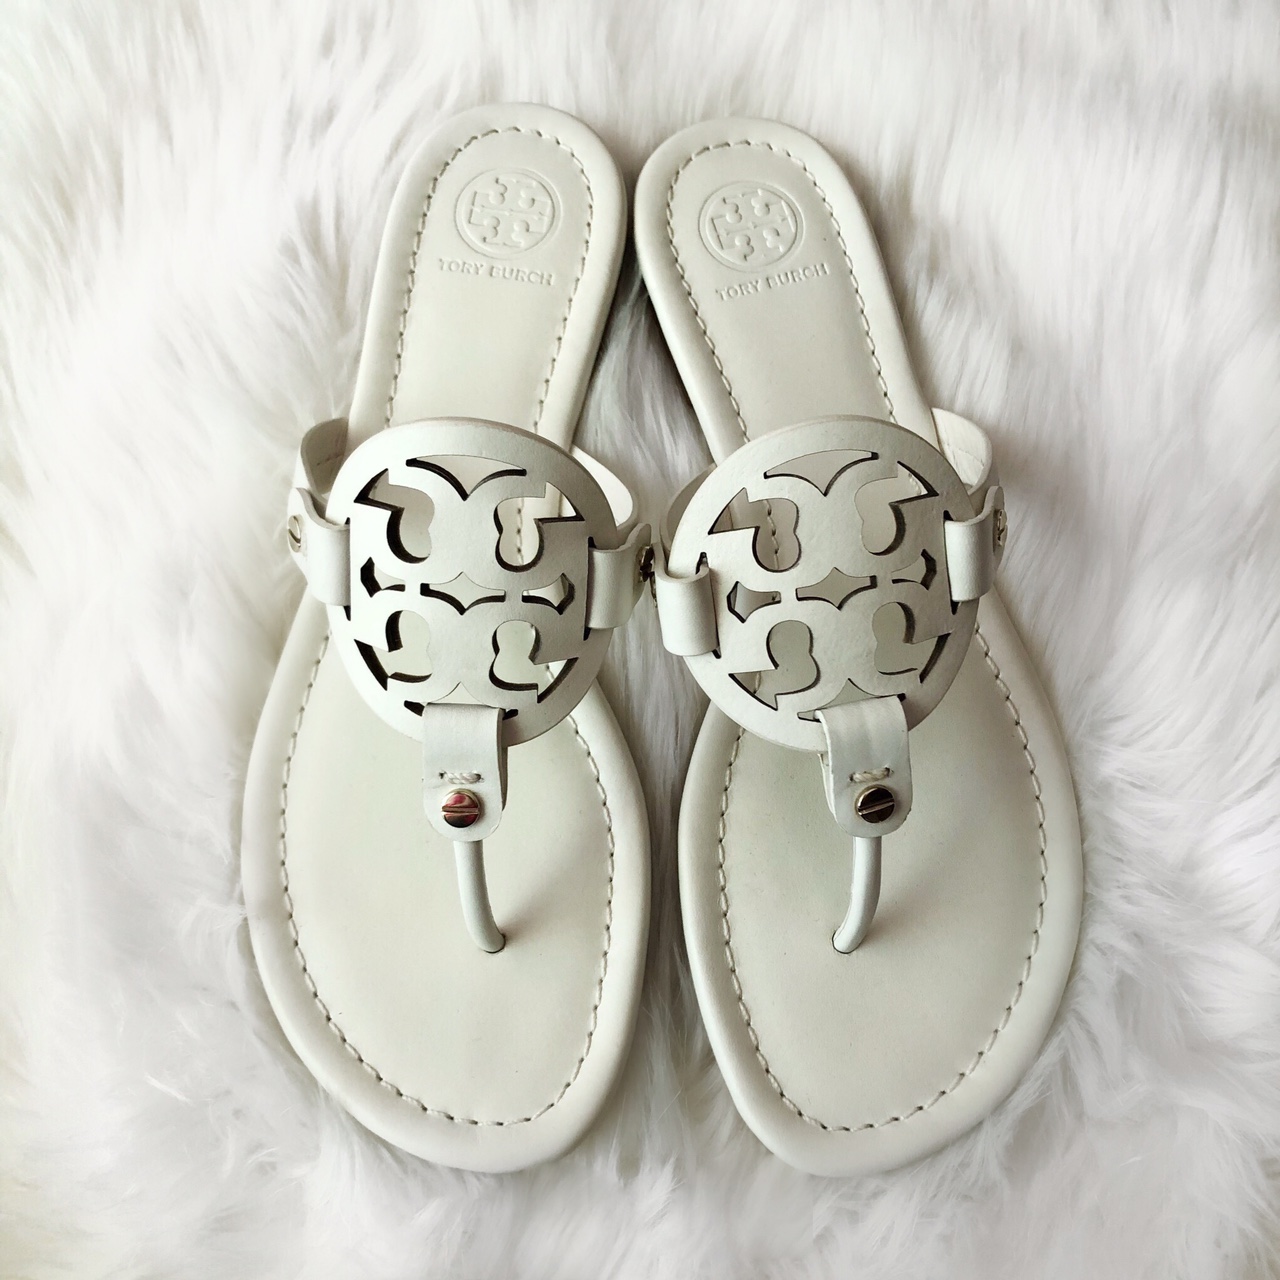 New Tory Burch Promo! | $50 - $100 Off Starts Now - The Double Take Girls  New Tory Burch Promo! | Save $50-$100 Off Your Purchase Now!